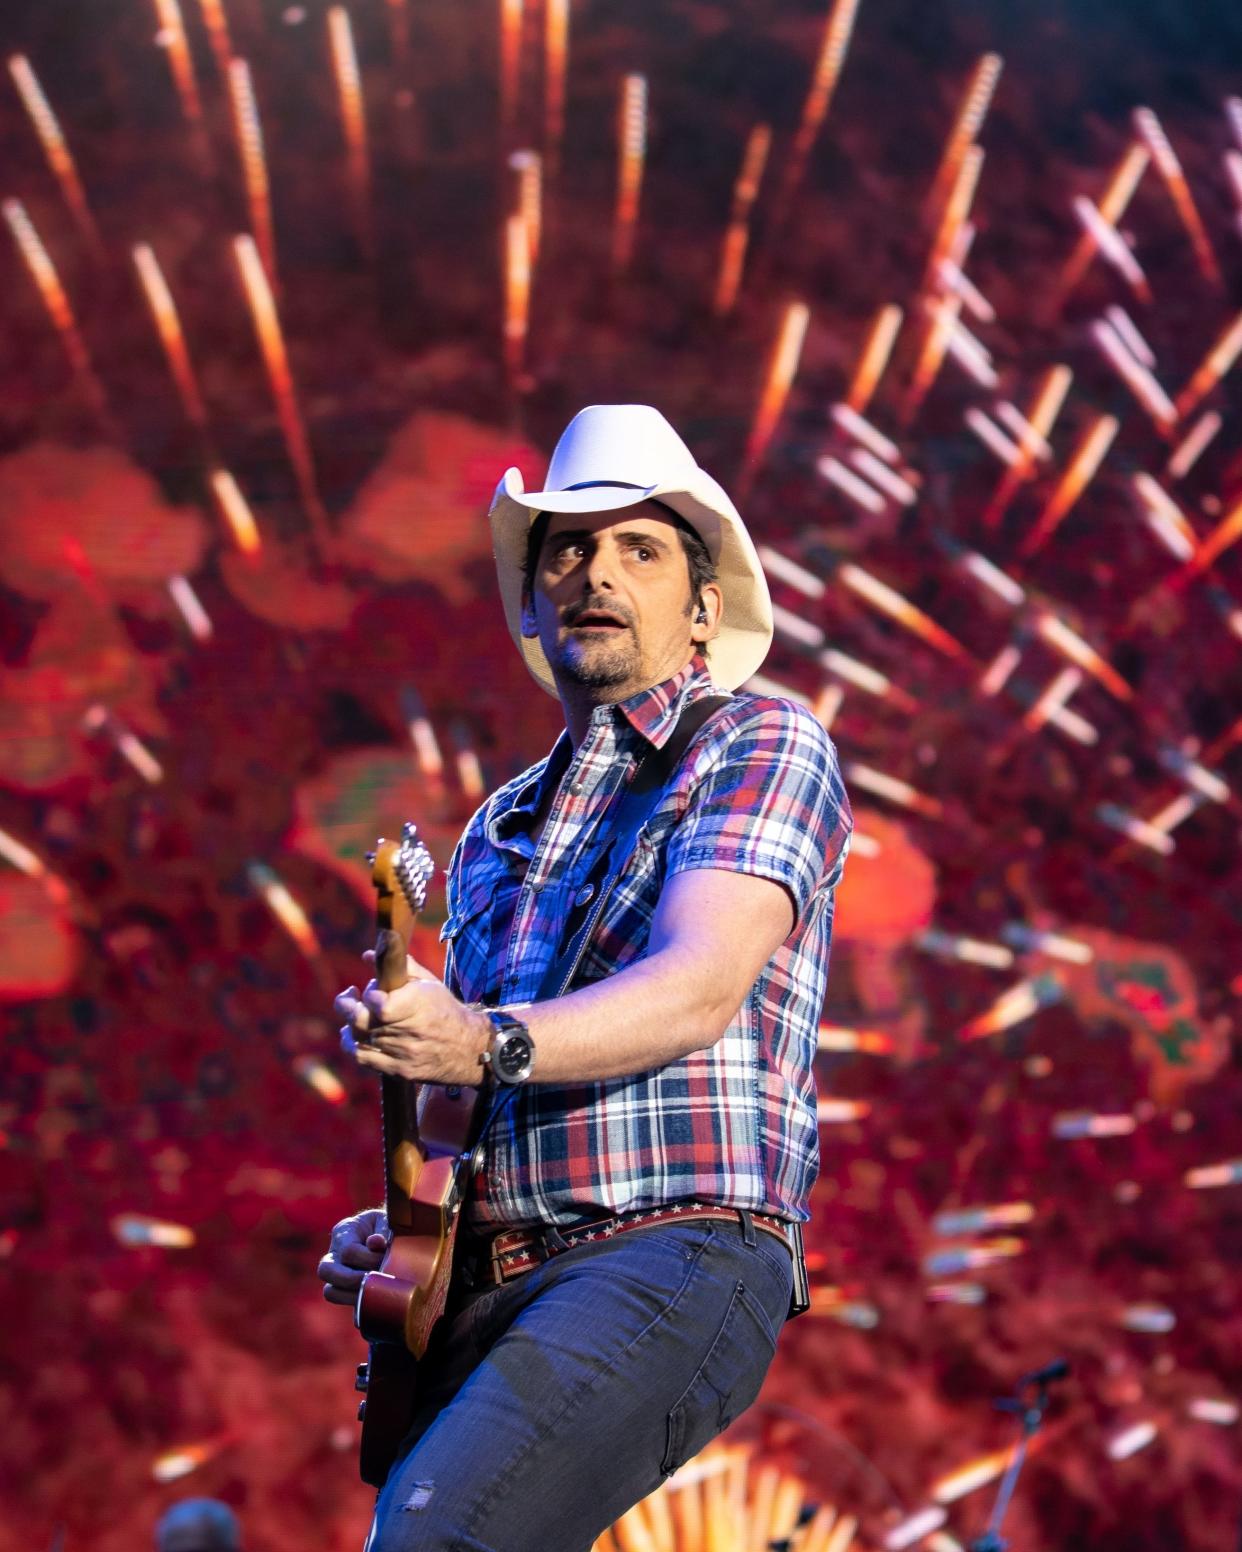 Brad Paisley performs during the Let Freedom Sing! Music City July 4th event in Nashville. Lake Erie Shores and Islands announced Monday that Paisley and the Zac Brown Band will headline Bash on the Bay at the Put-in-Bay airport Aug. 24 and 25.